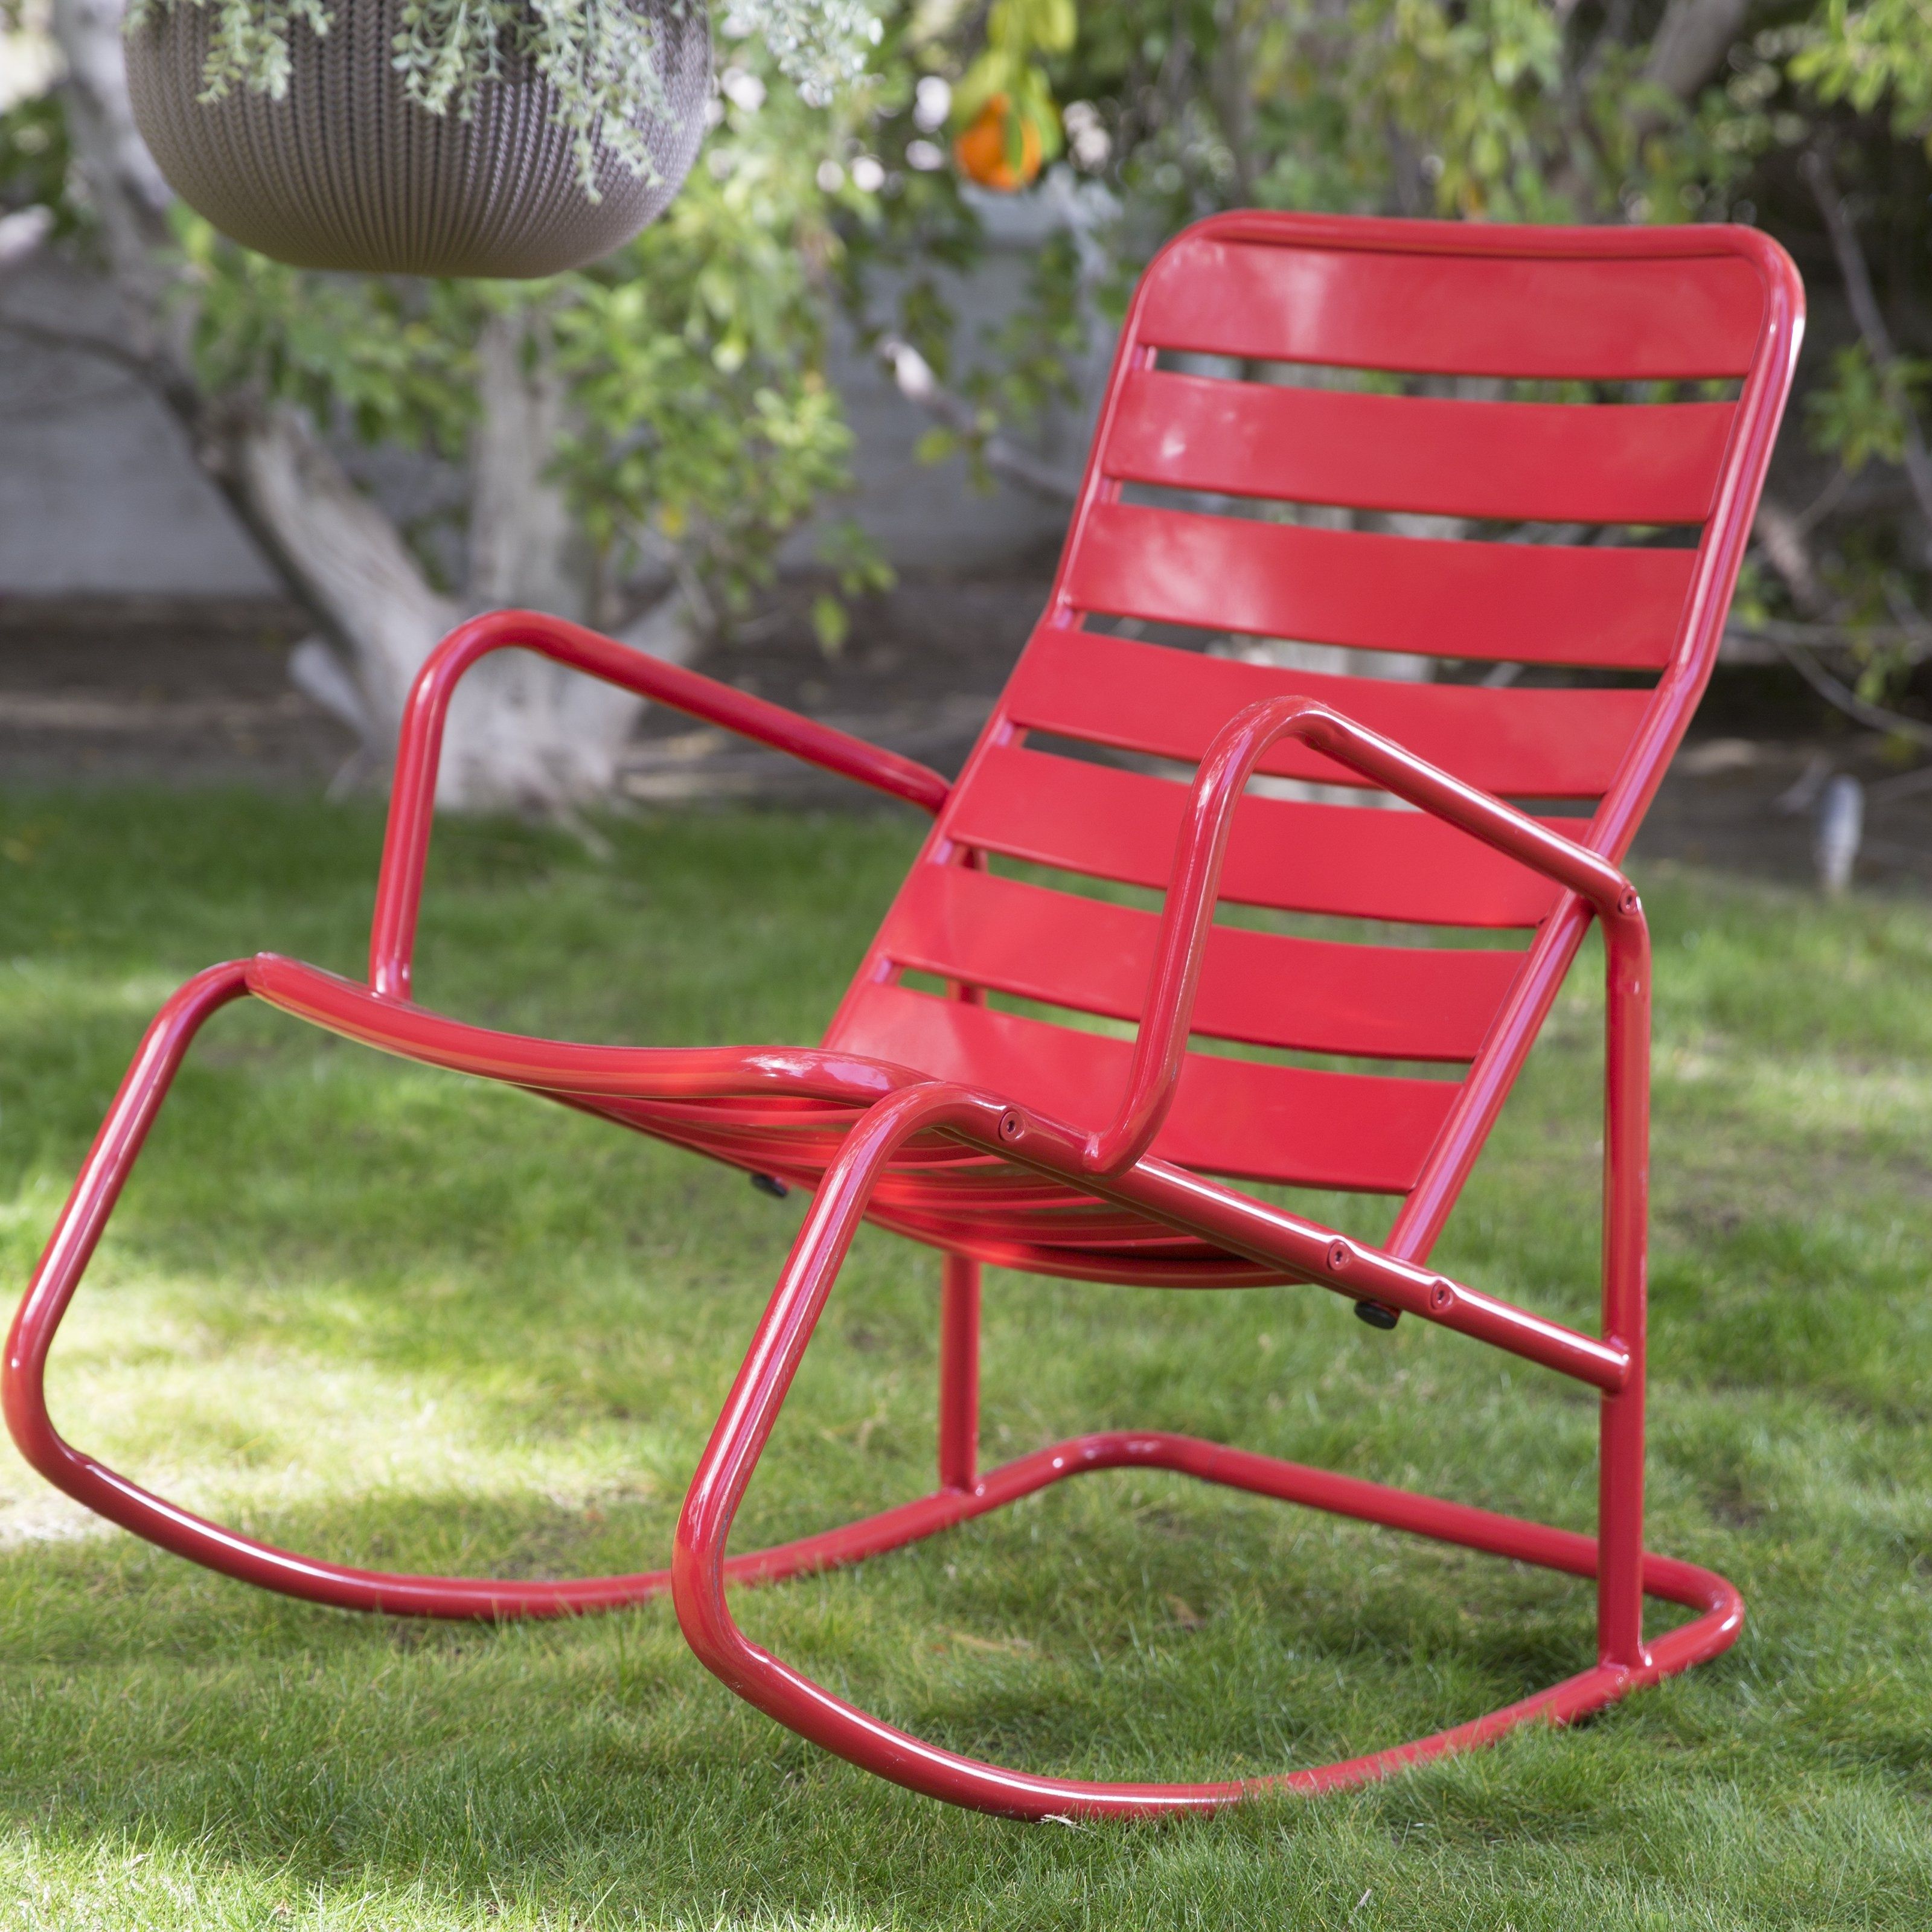 Vintage Outdoor Rocking Chairs Throughout Most Popular Outdoor Metal Rocking Chair – Modern Chairs Quality Interior  (View 13 of 20)